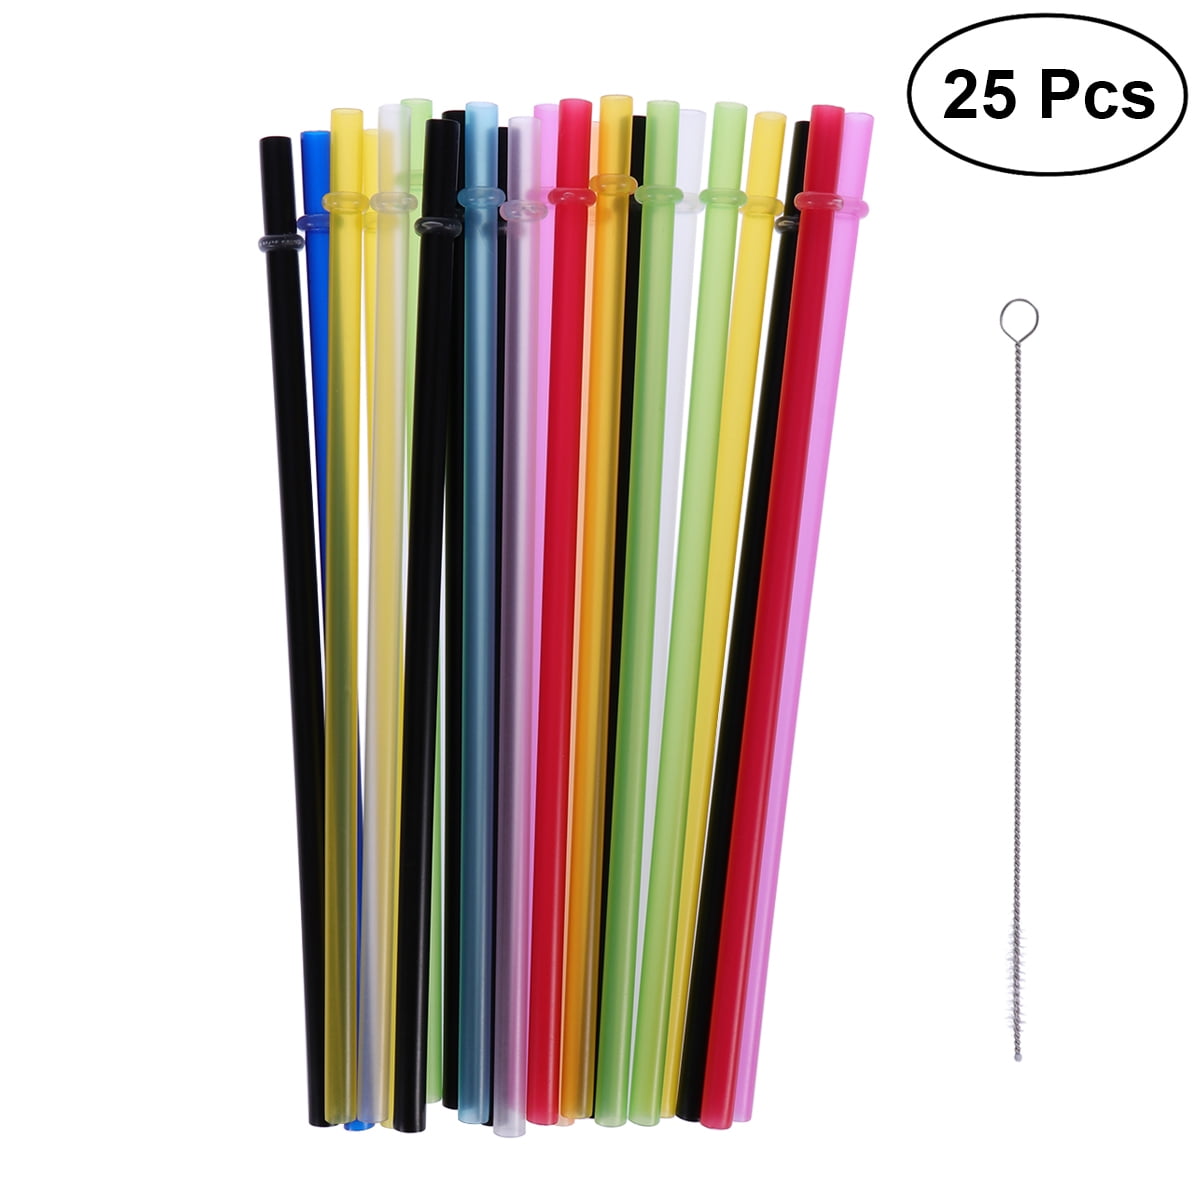 Plastic Straws 25 Brushes with Rings Solid Color Straw Reusable Plastic Thick Drinking Straws Mason Jar Straws for Party or Home Use - Size 23cm (